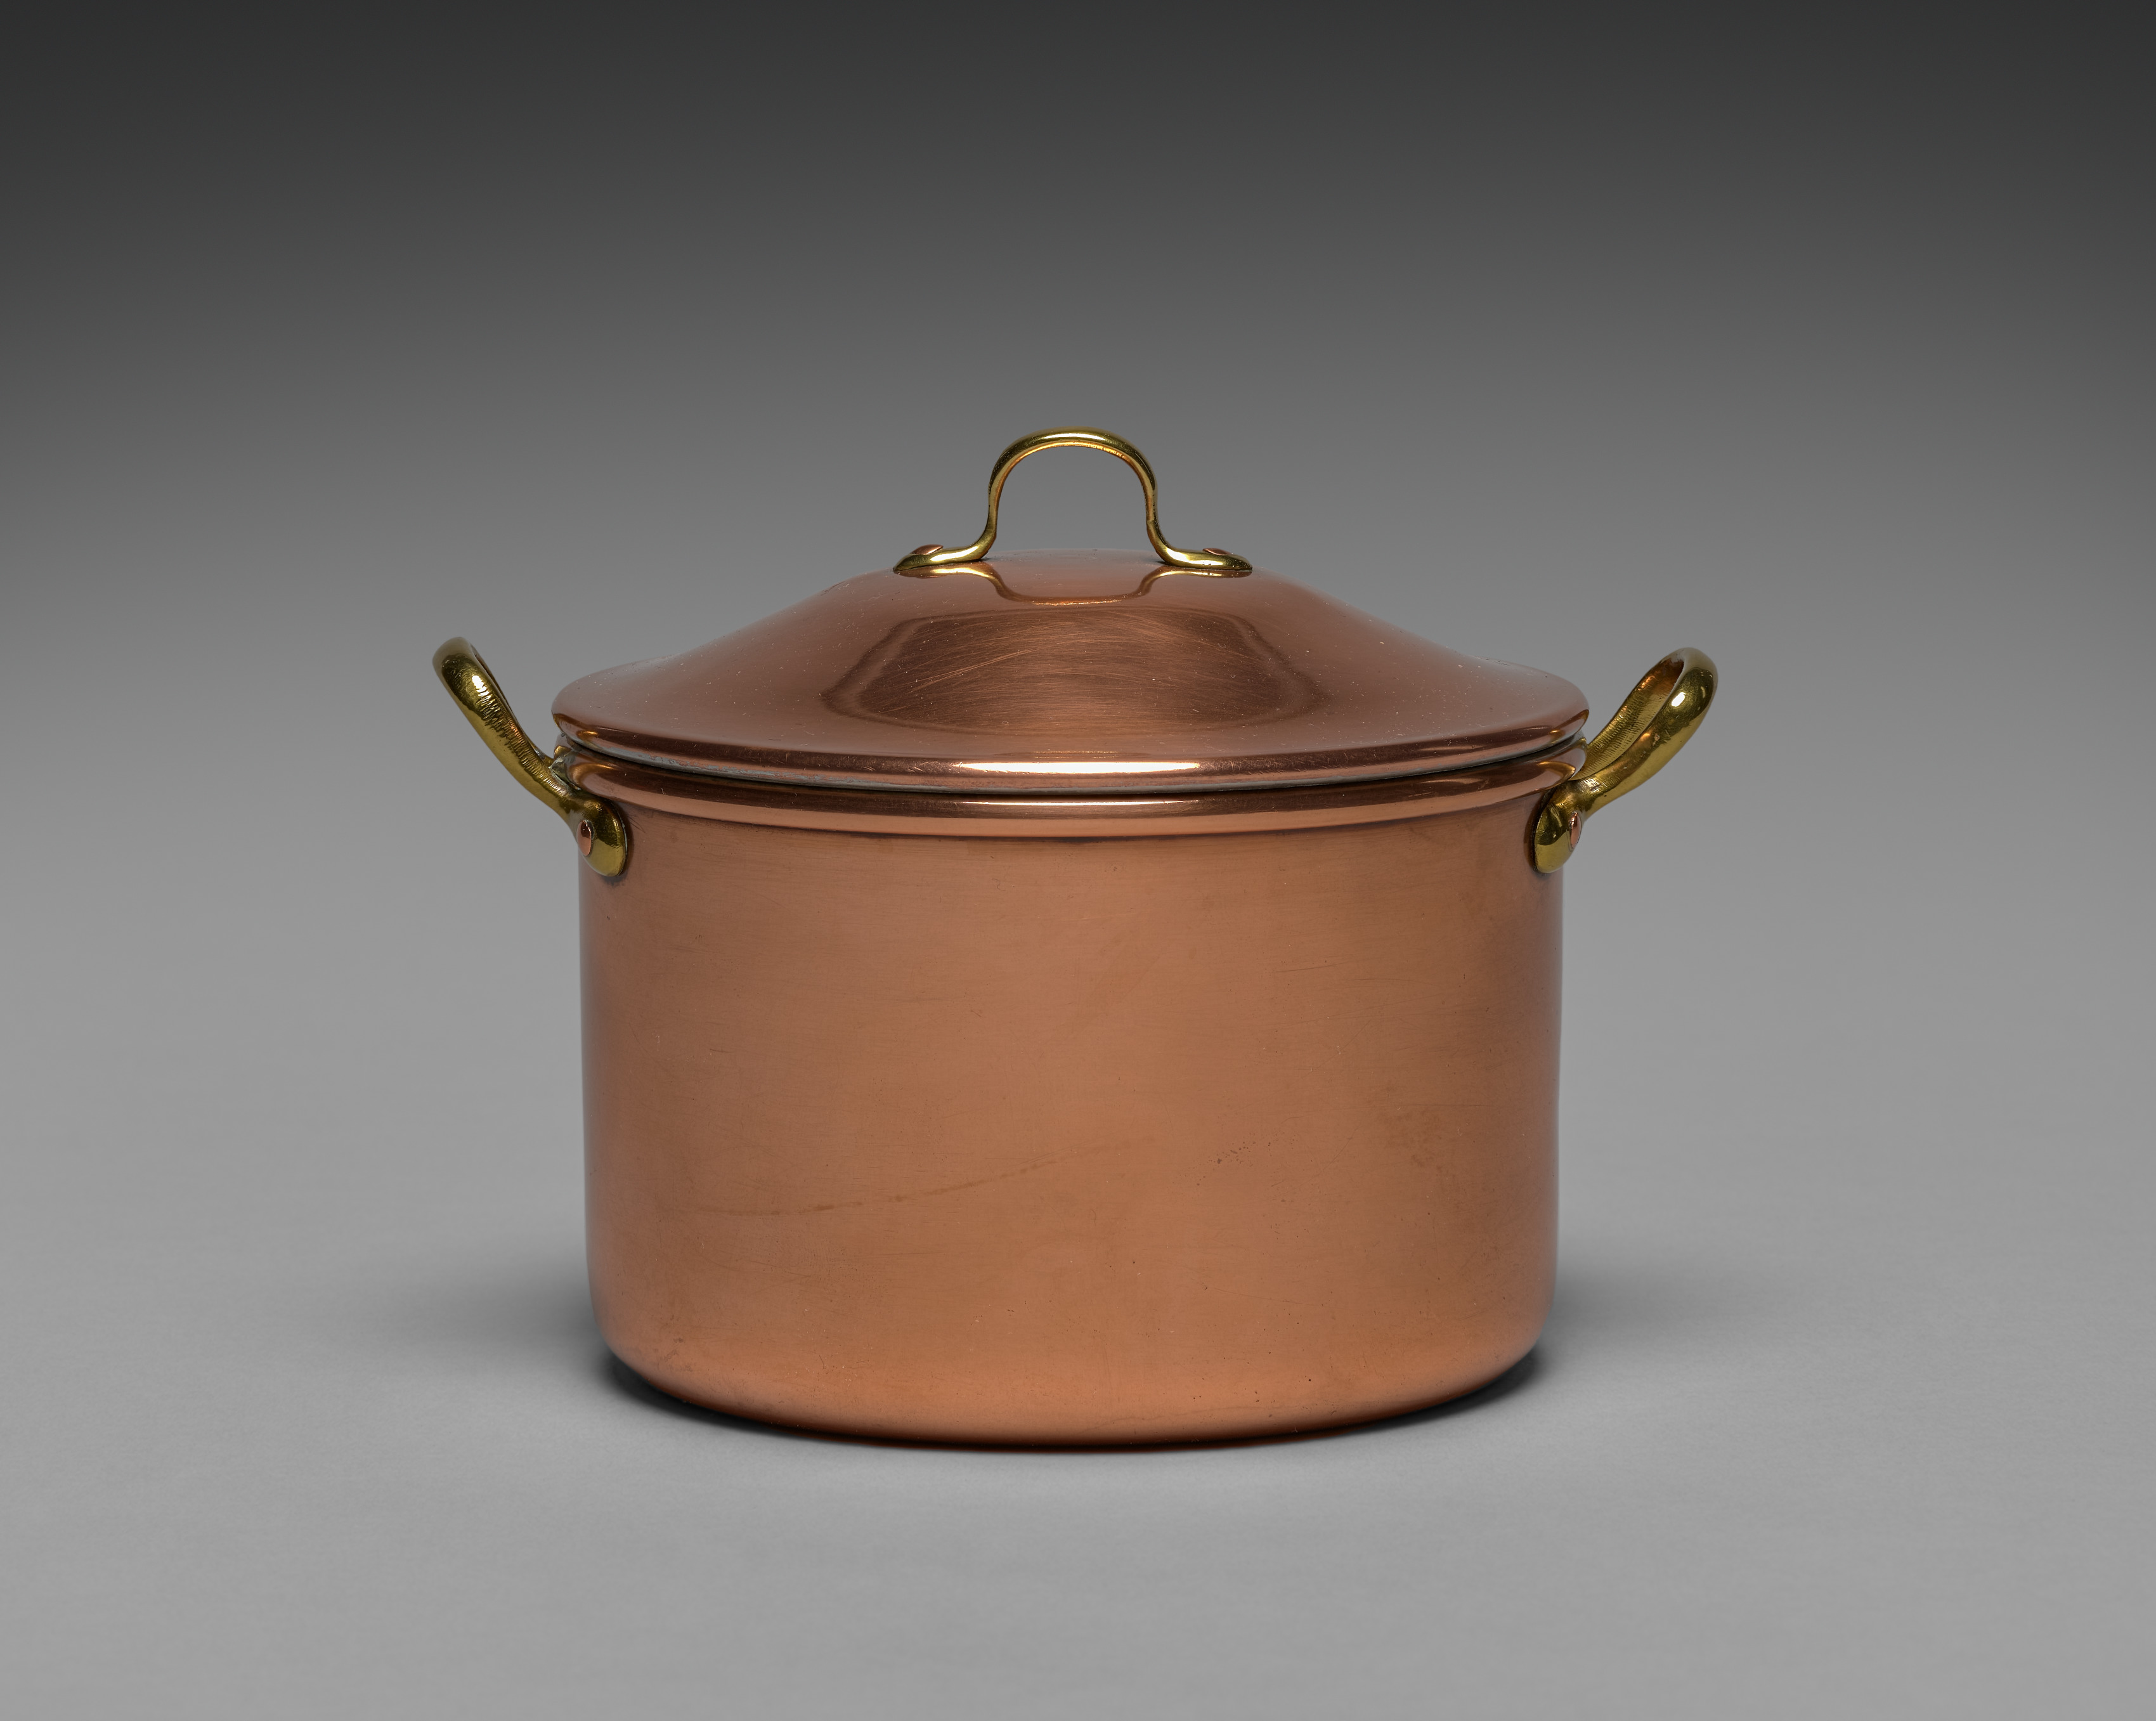 Covered Pot